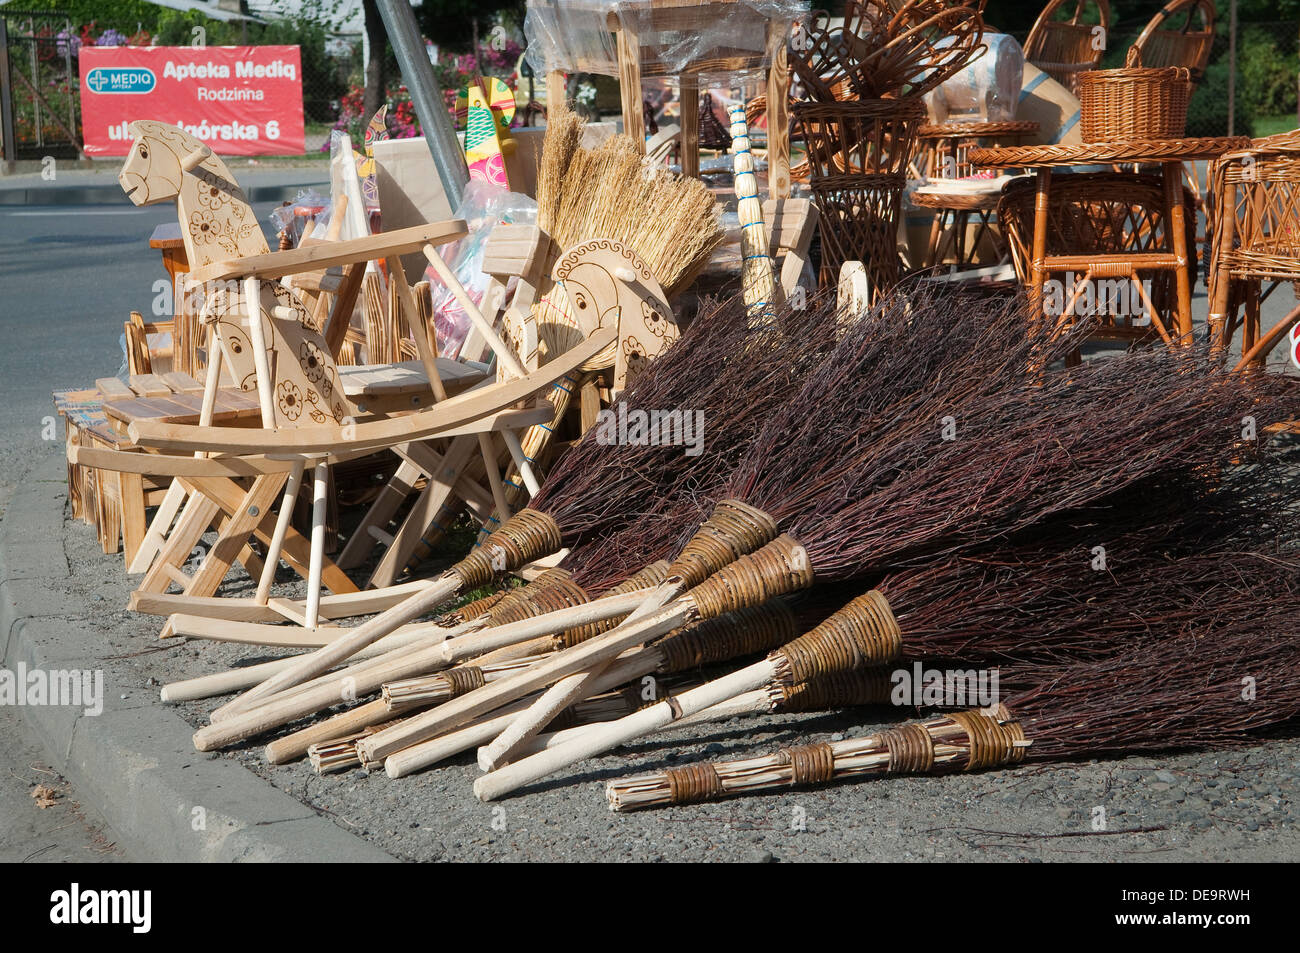 Besoms for sale at local farmers market in Wadowice, Poland. Stock Photo